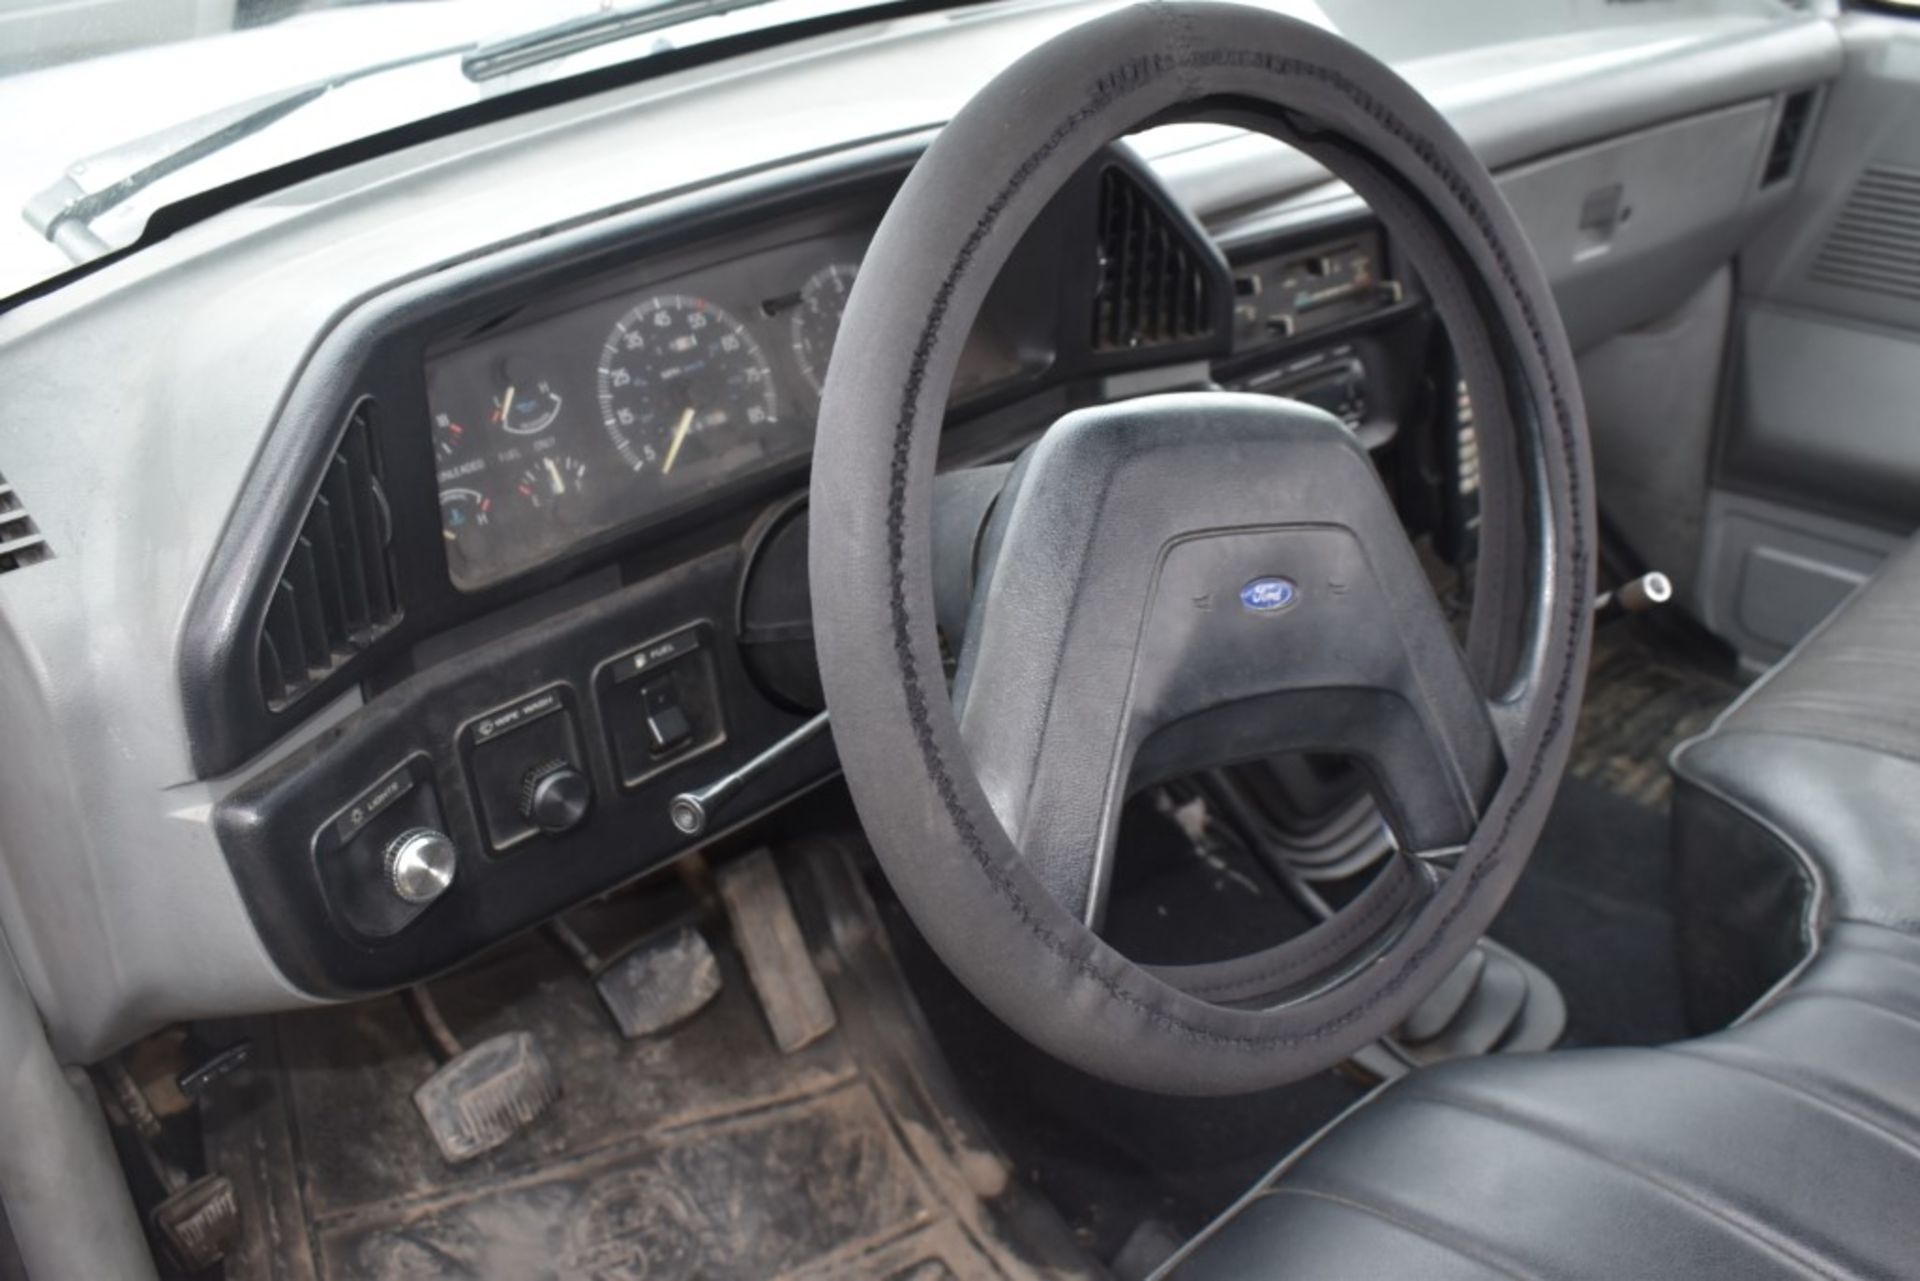 1987 Ford F-150 Truck - Image 31 of 36